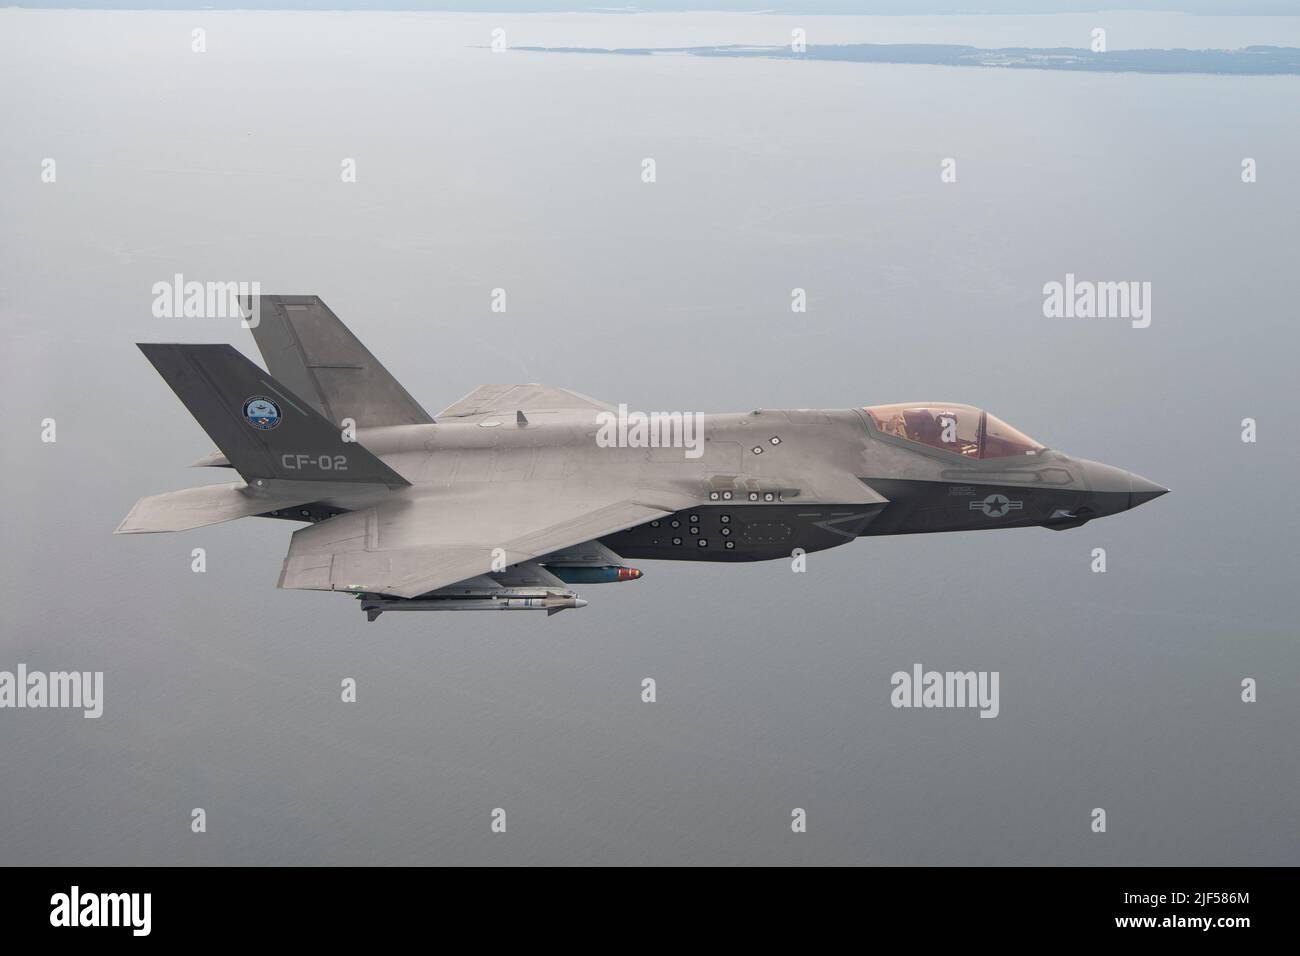 U.S. Marine Corps test pilot Maj. Dylan “Bilbo” Nicholas pilots an F-35C during a GBU-38/54 flight test at NAS Patuxent River, Maryland, on June 21, 2022. Before new weapons and aircraft capabilities are integrated into operational fleet squadrons the Pax River F-35 Integrated Test Force and Air Test and Evaluation Squadron (VX) 23 developmental test pilots thoroughly test them. The F-35, which has been operational since 2015, is the most lethal, survivable, and interoperable fighter aircraft ever built. Stock Photo